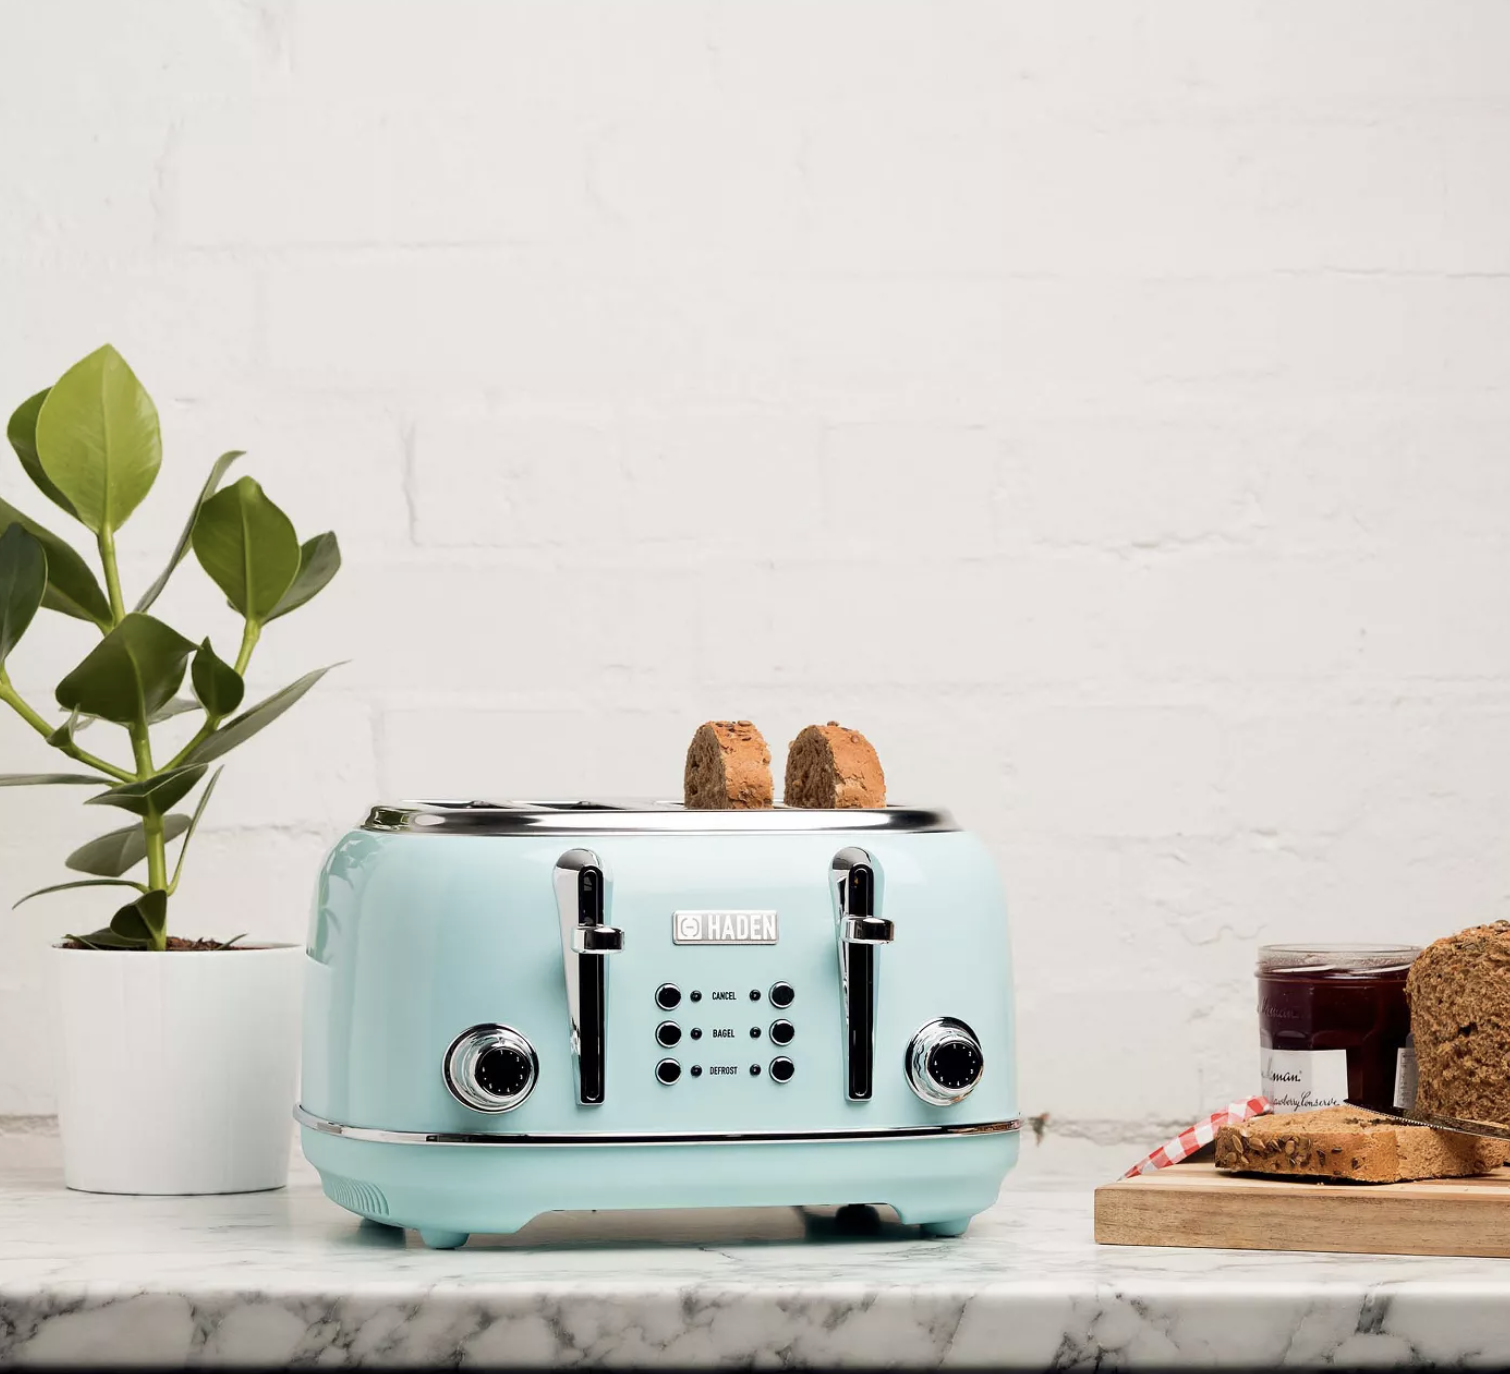 the blue toaster on kitchen counter